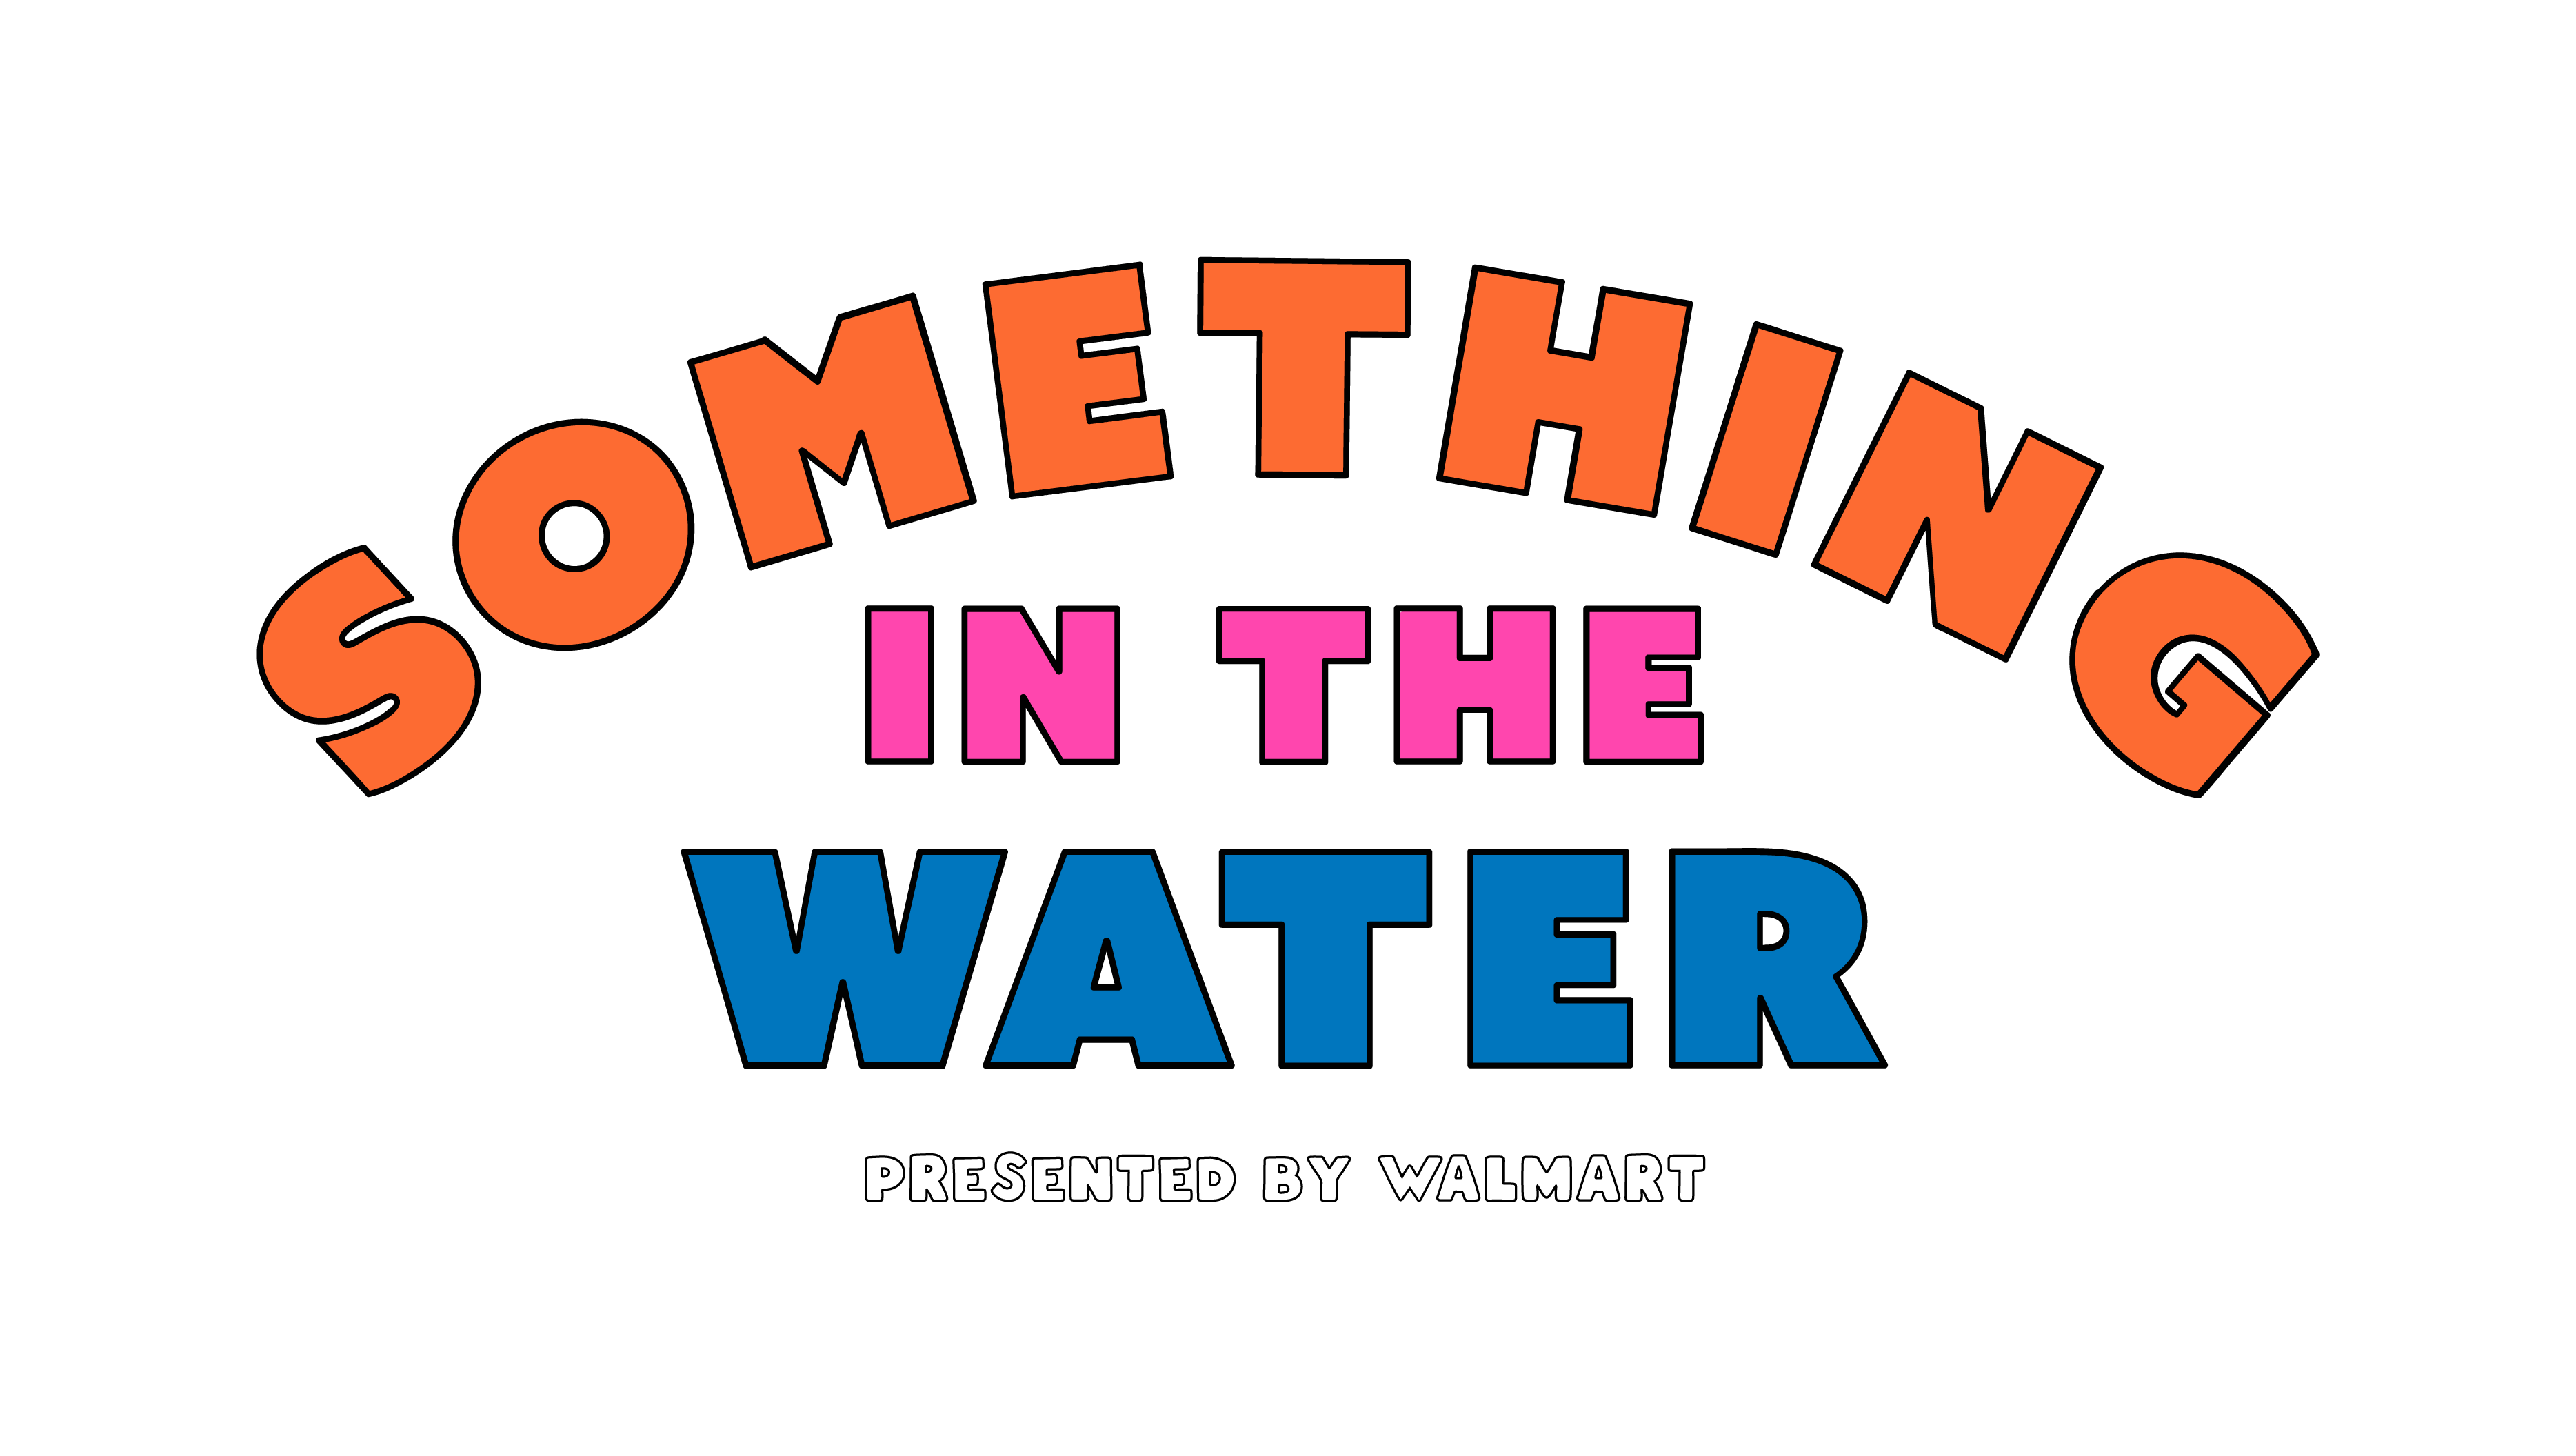 SOMETHING IN THE WATER